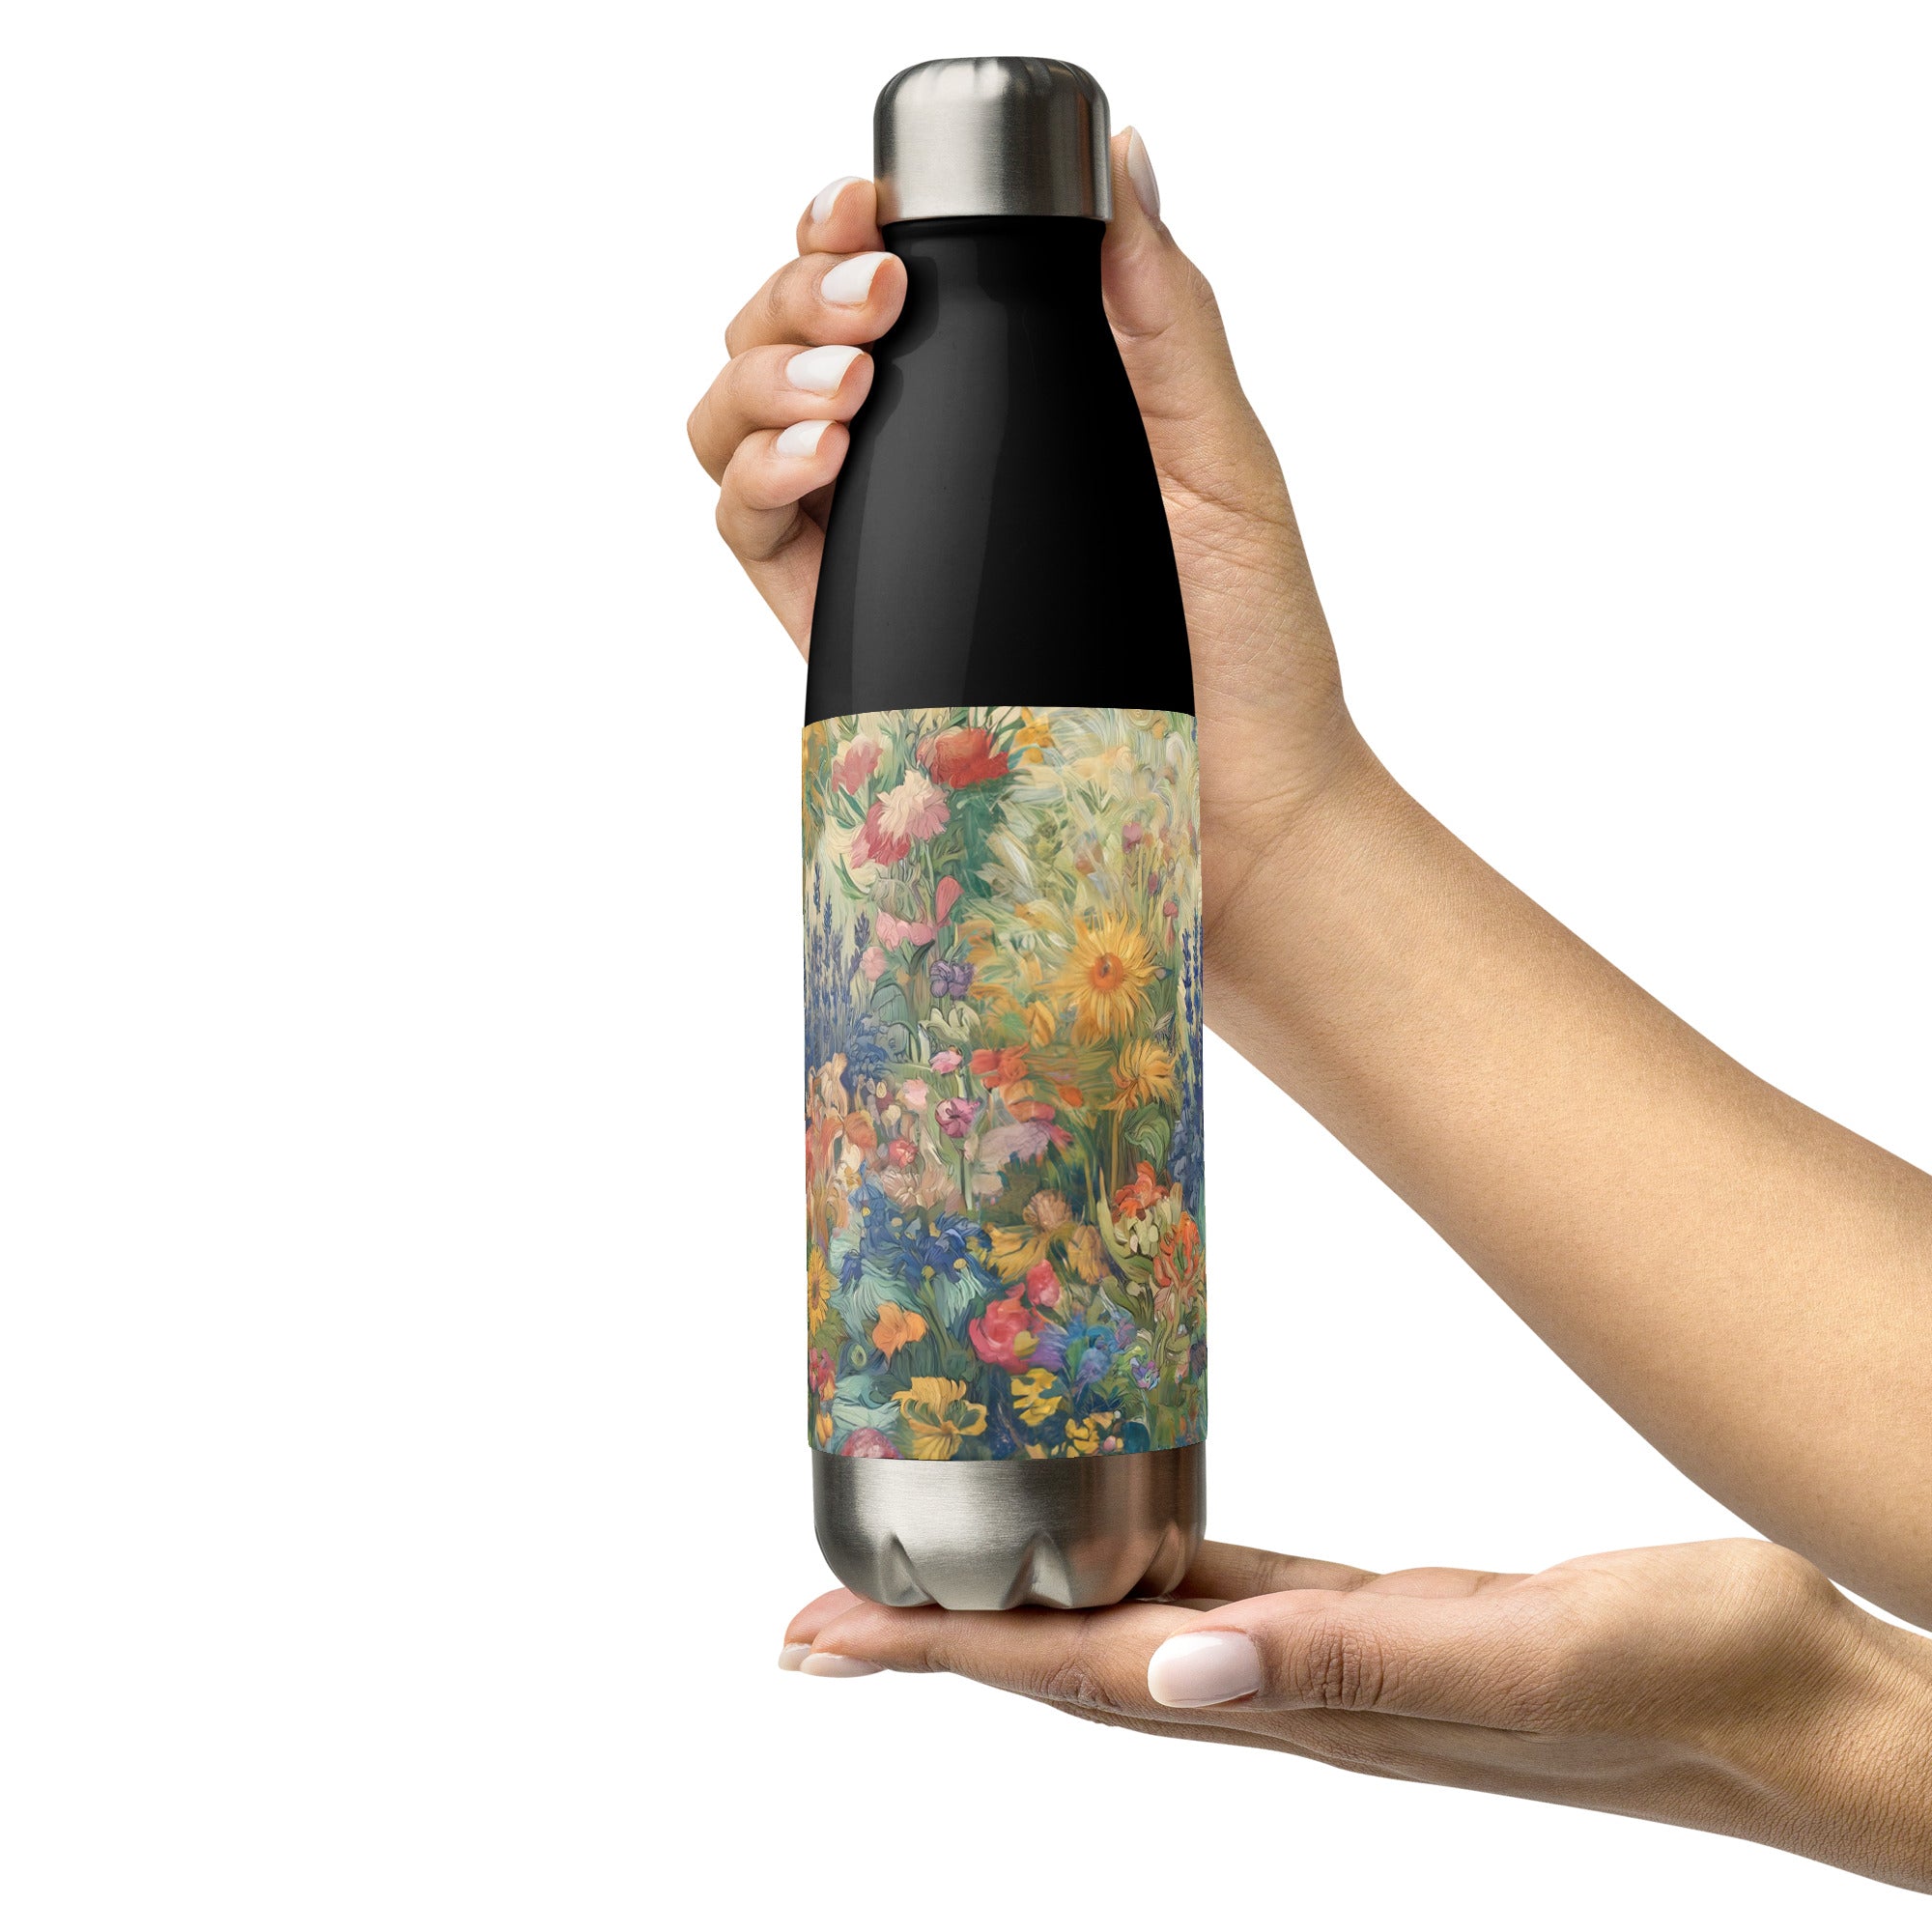 Vincent van Gogh 'Garden at Arles' Famous Painting Water Bottle | Stainless Steel Art Water Bottle